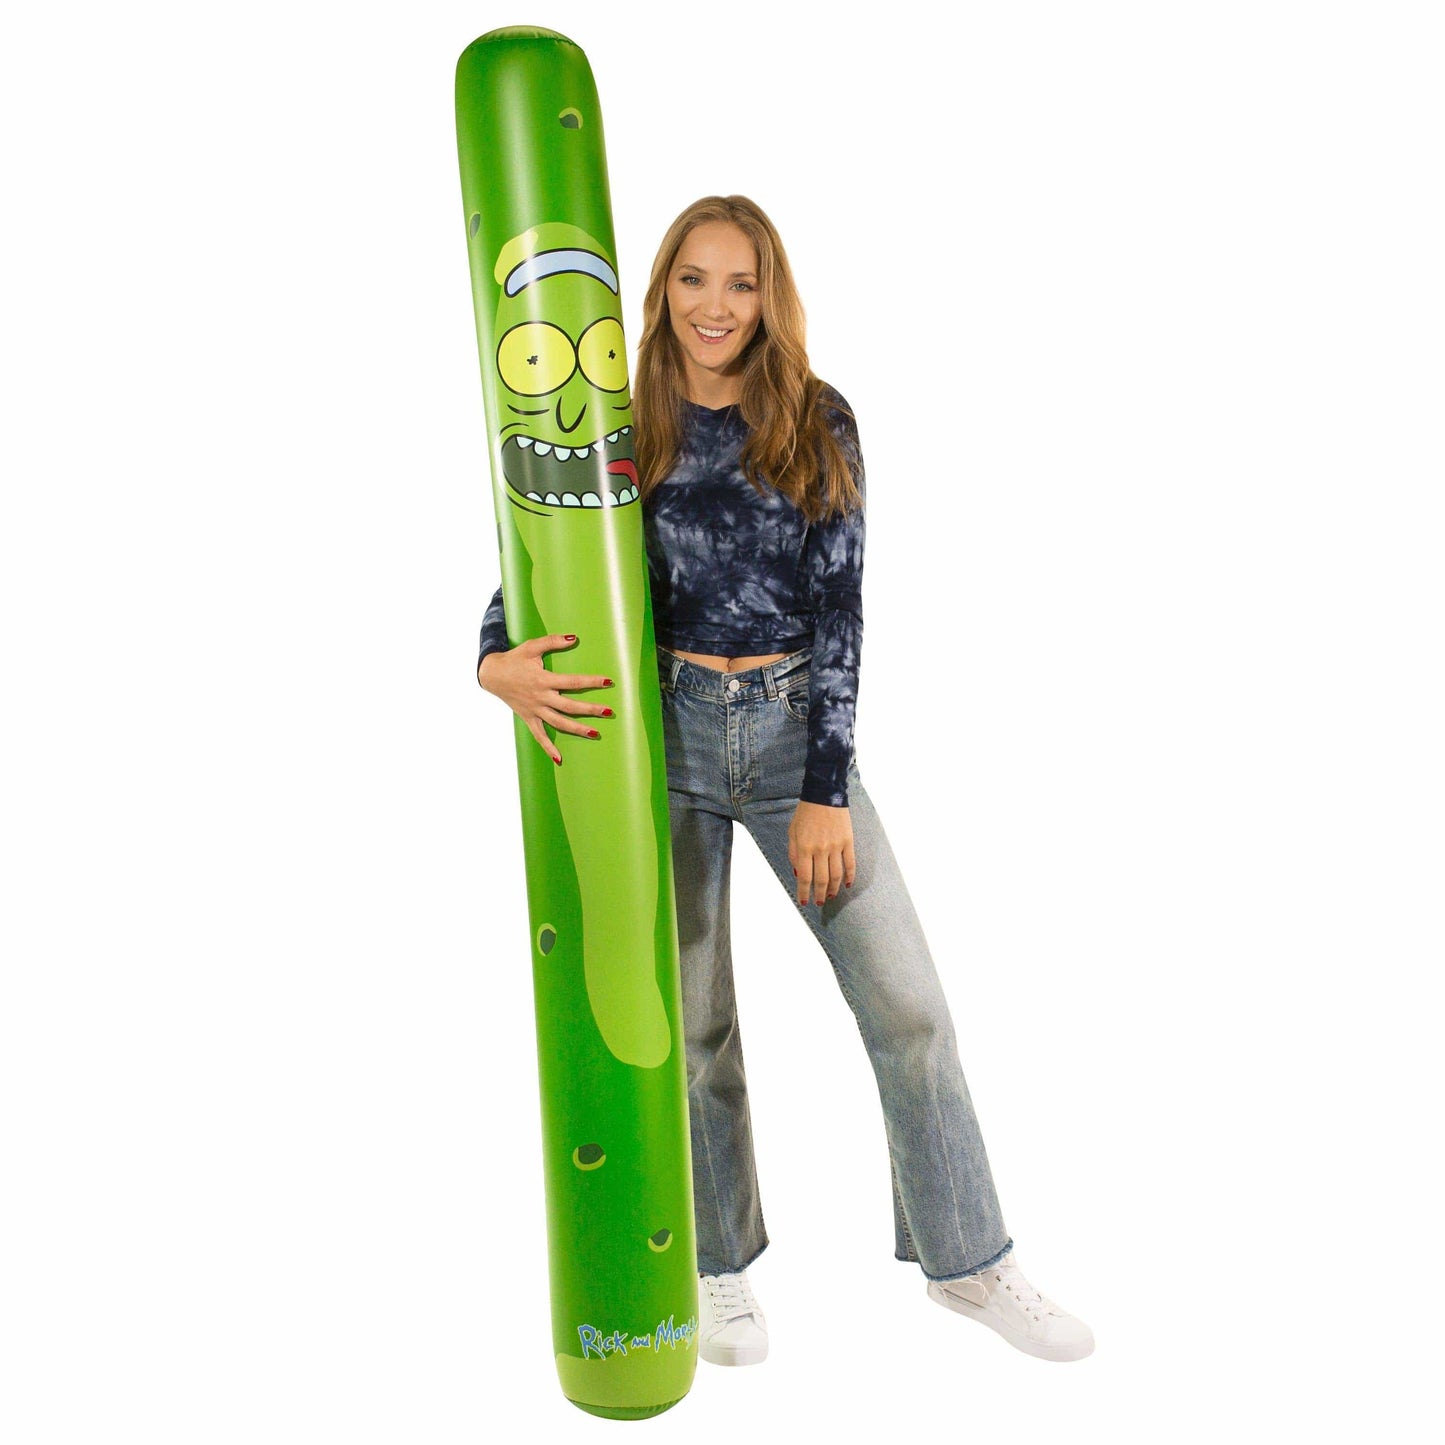 Rick and Morty Pickle Rick Inflatable Pool Noodle Giant